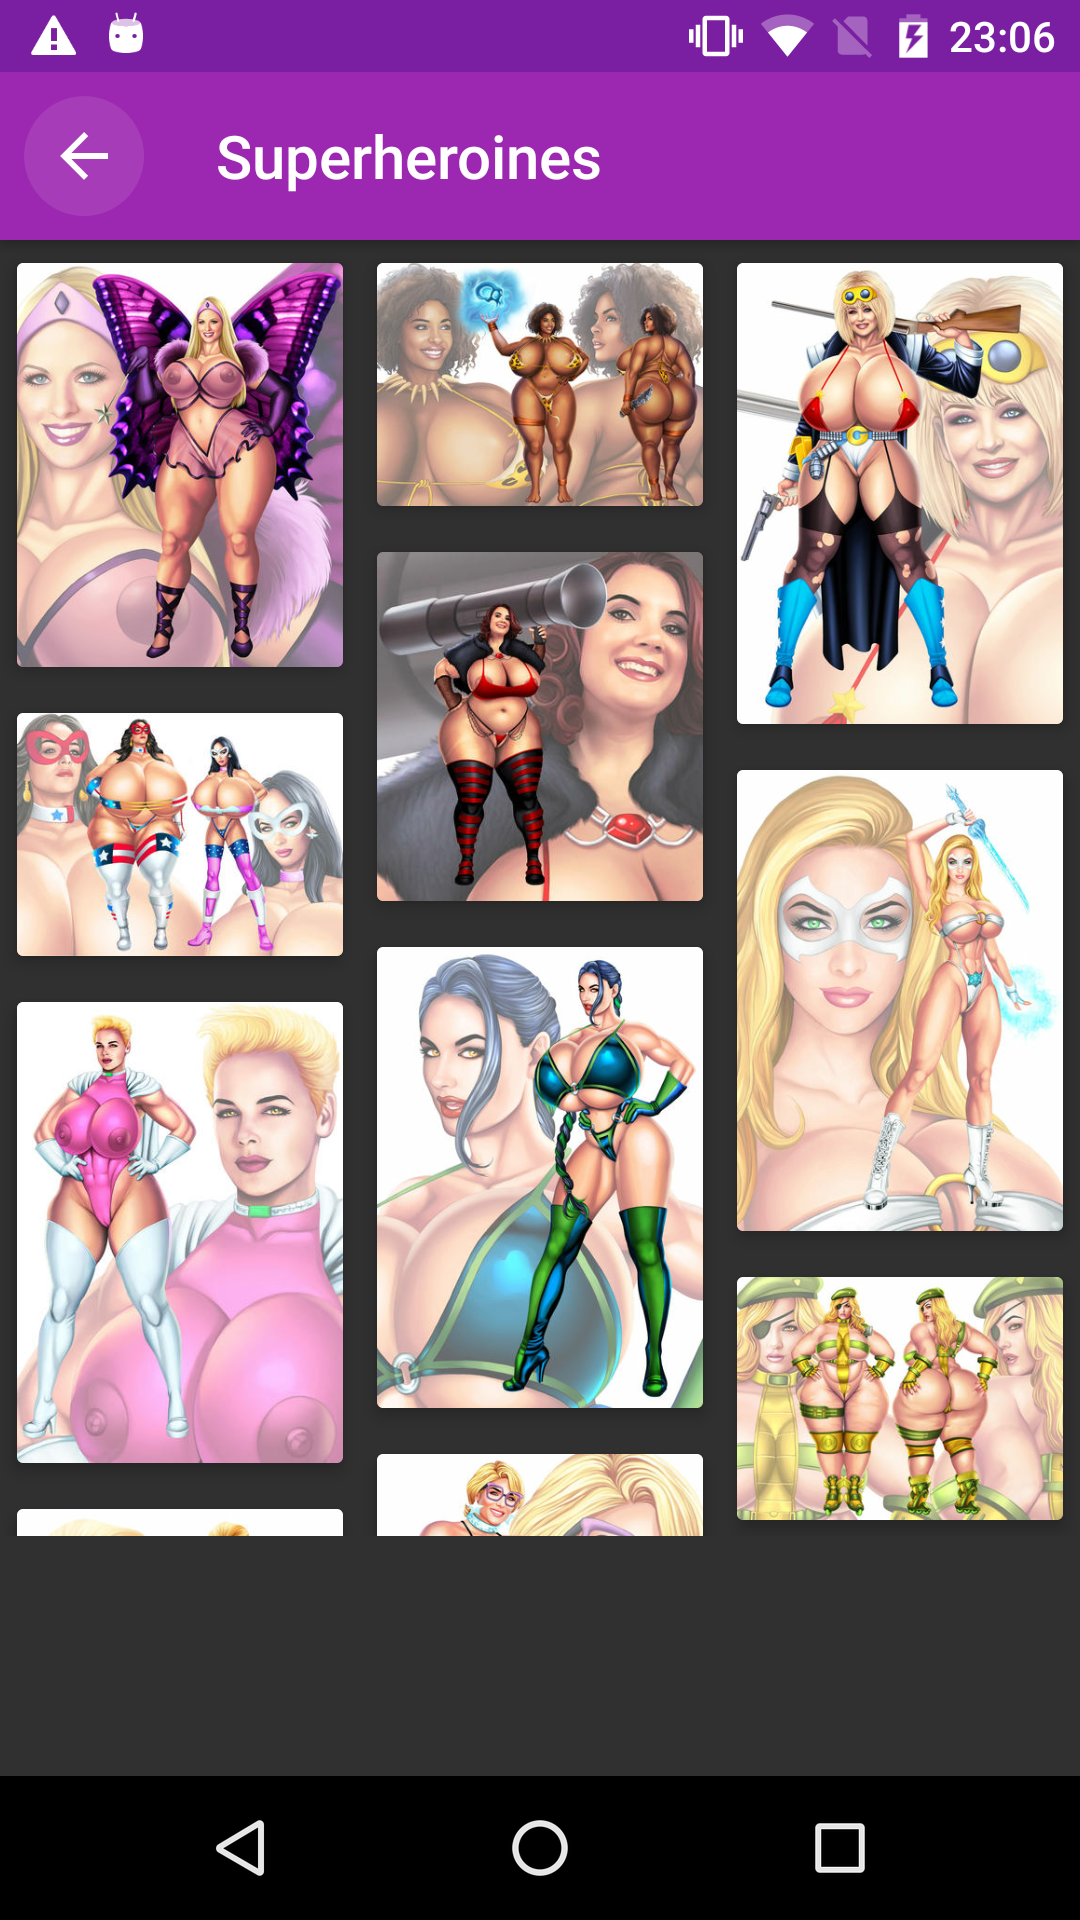 Superheroines hot,gallerie,apks,android,video,porn,sexy,hentia,caprice,comics,hotebonypics,ebony,xxx,wallpapers,superheroines,collection,hentai,picture,images,apps,apk